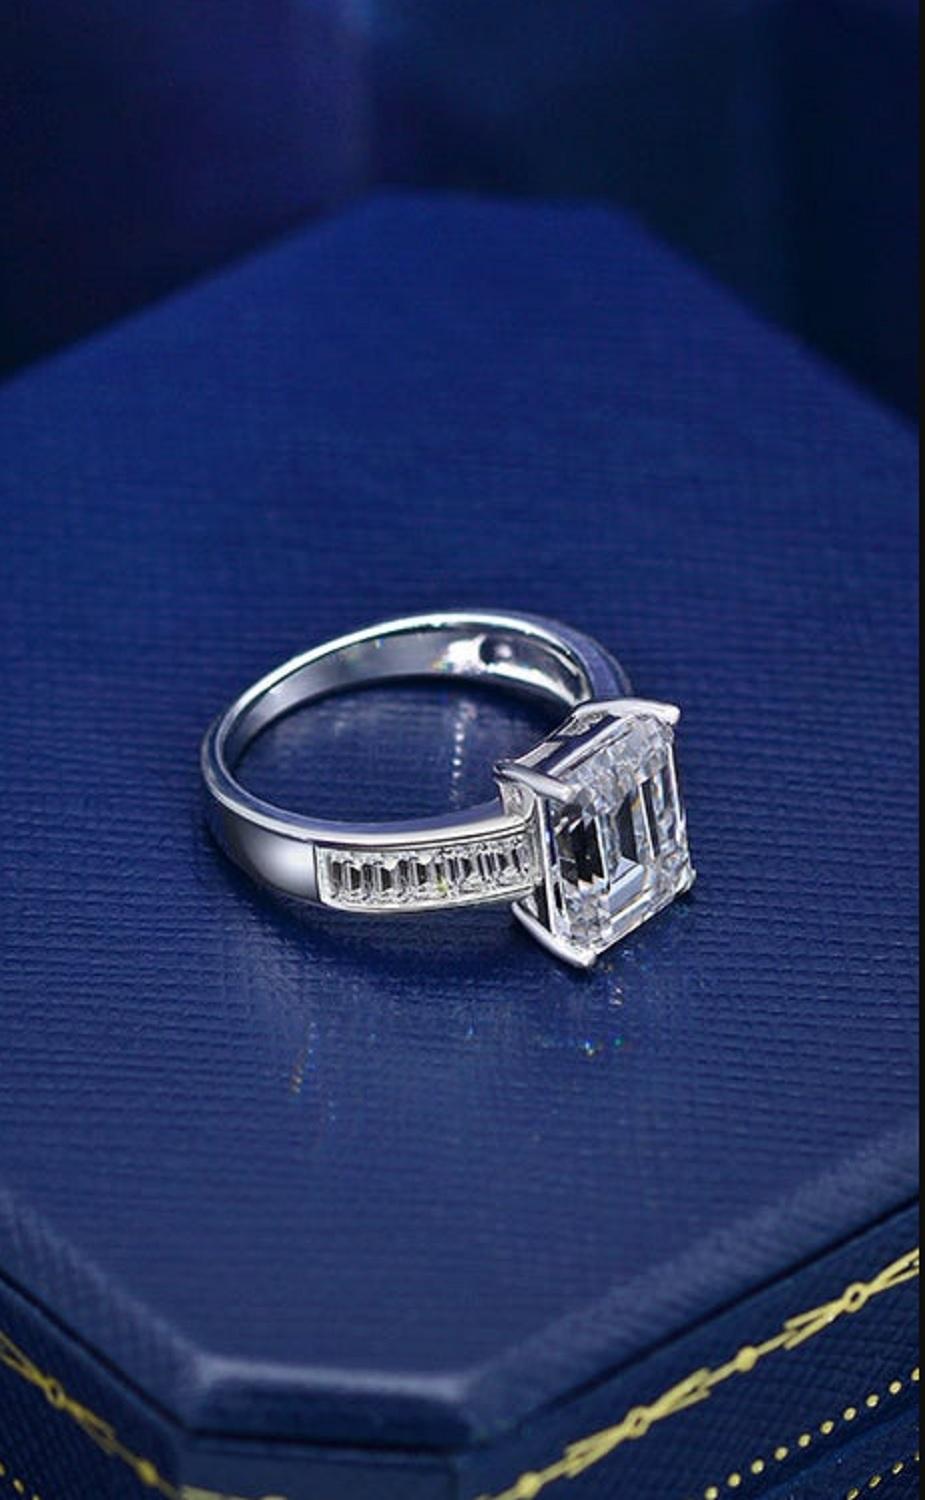 This ring exudes class ans sophistication the main stone has the perfect proportions and ratio.